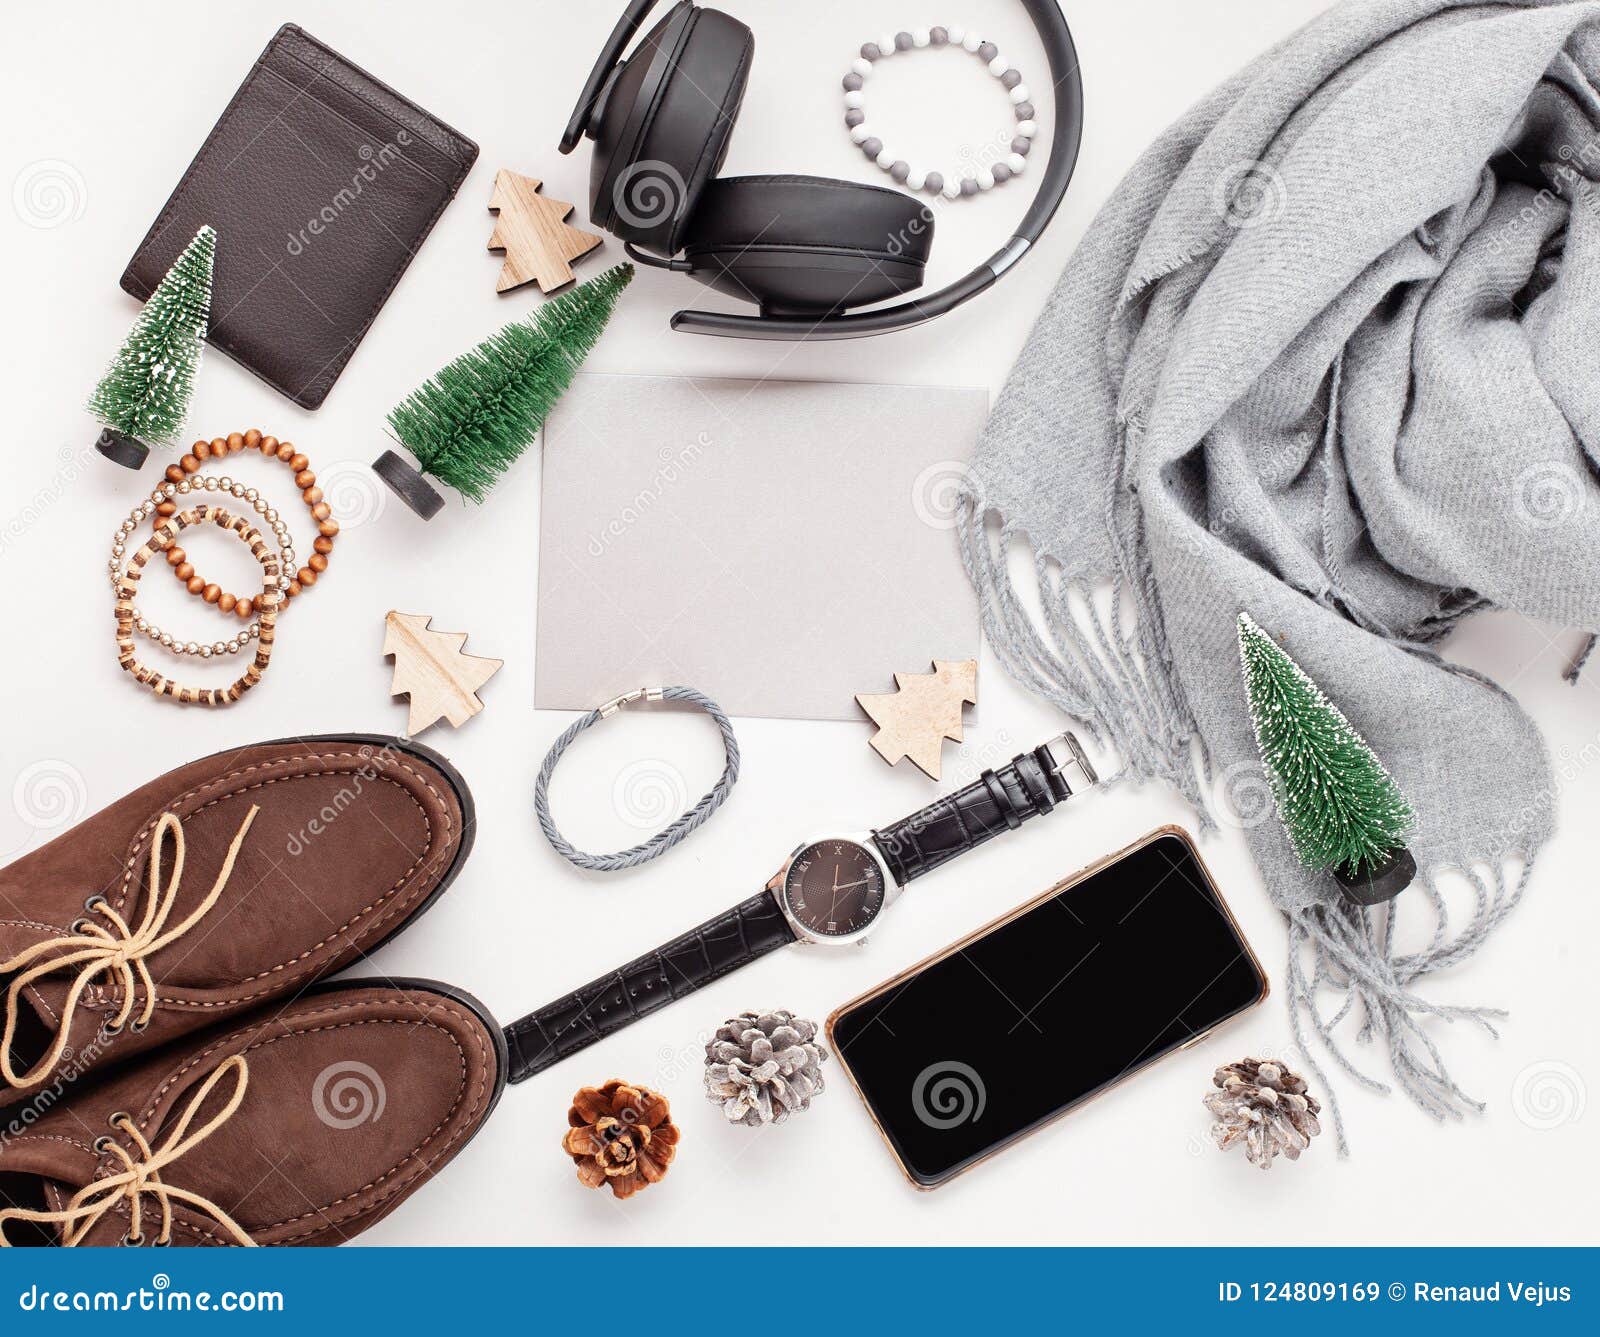 Flat Lay of S Accessories with Shoes, Watch, Phone, Earphone Stock Image Image of percent: 124809169